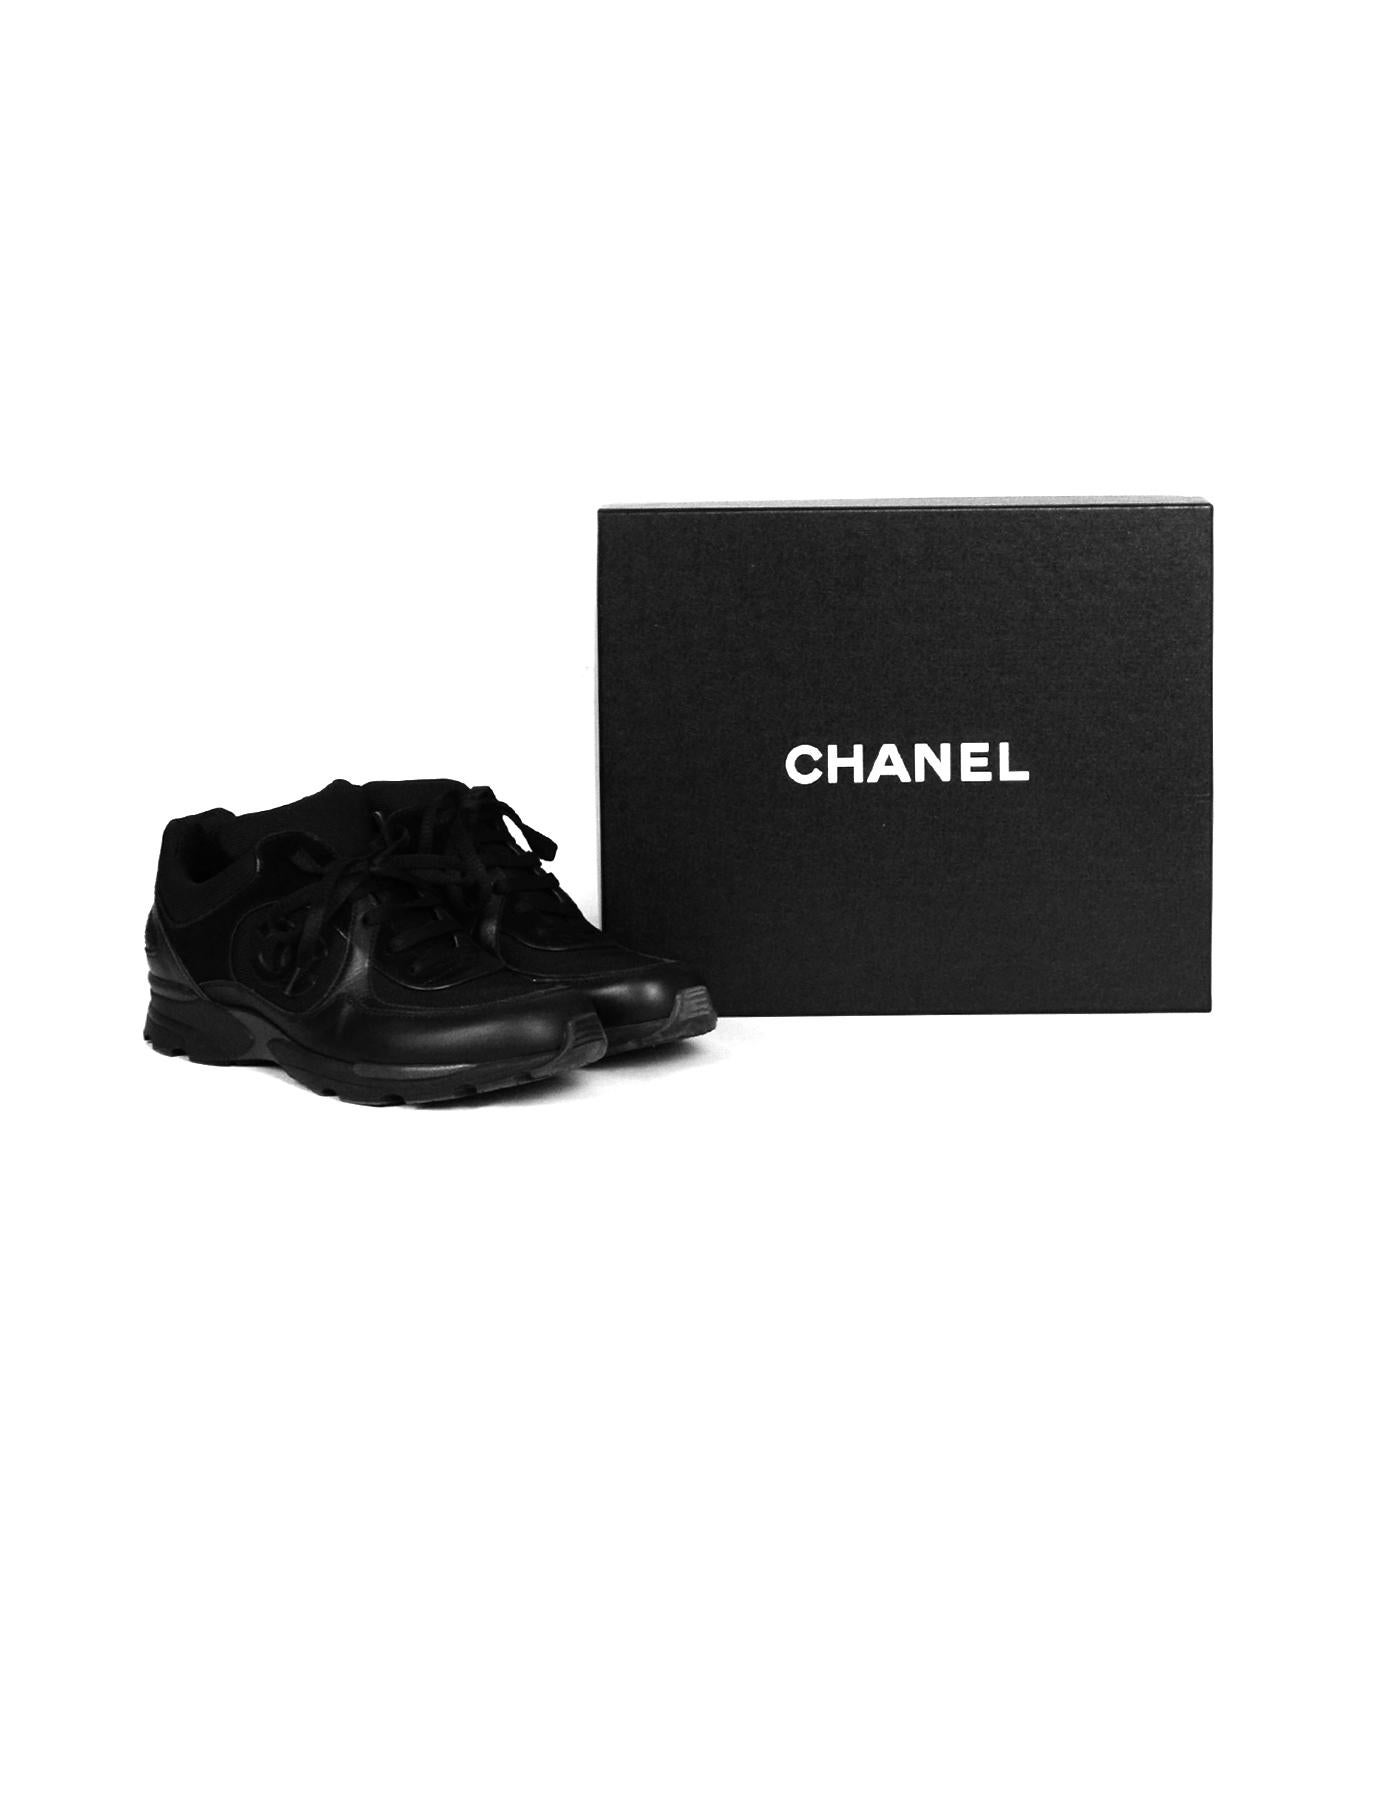 Chanel Black Leather/Suede Sneakers with CC Logo sz 40 5